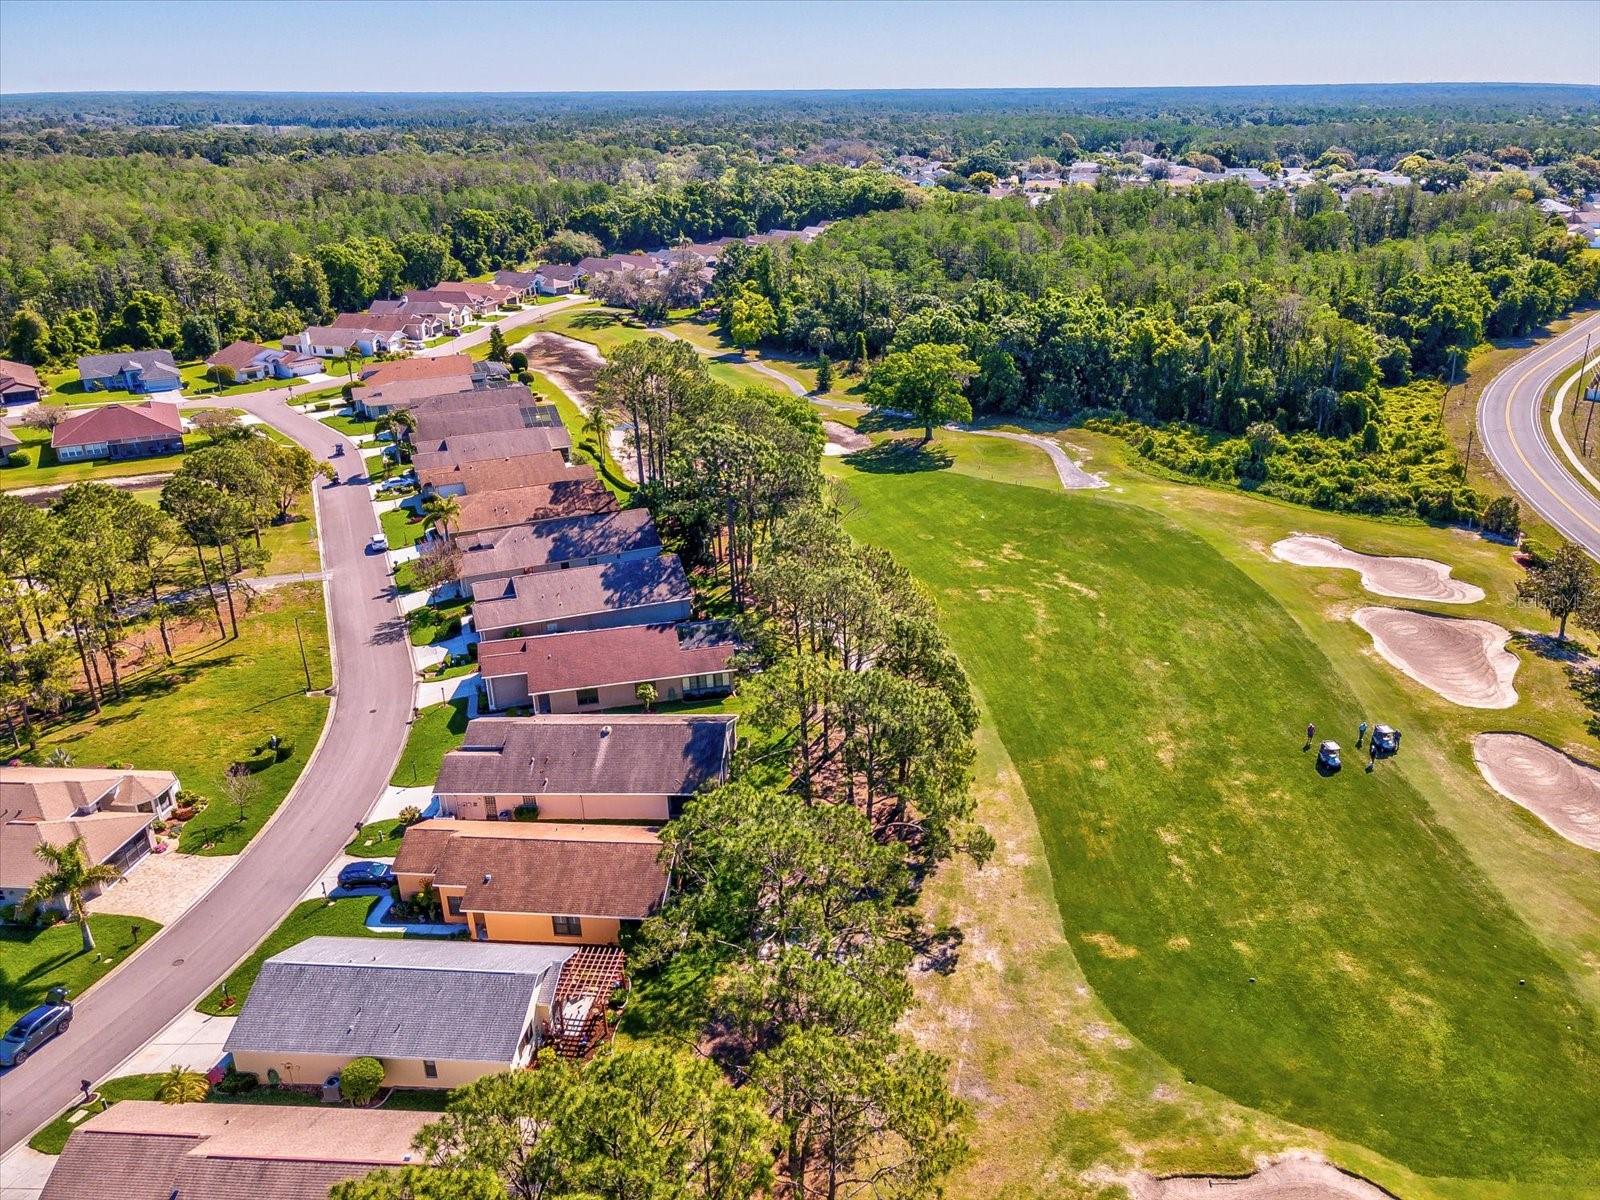 Drone view of street, homes and golf course